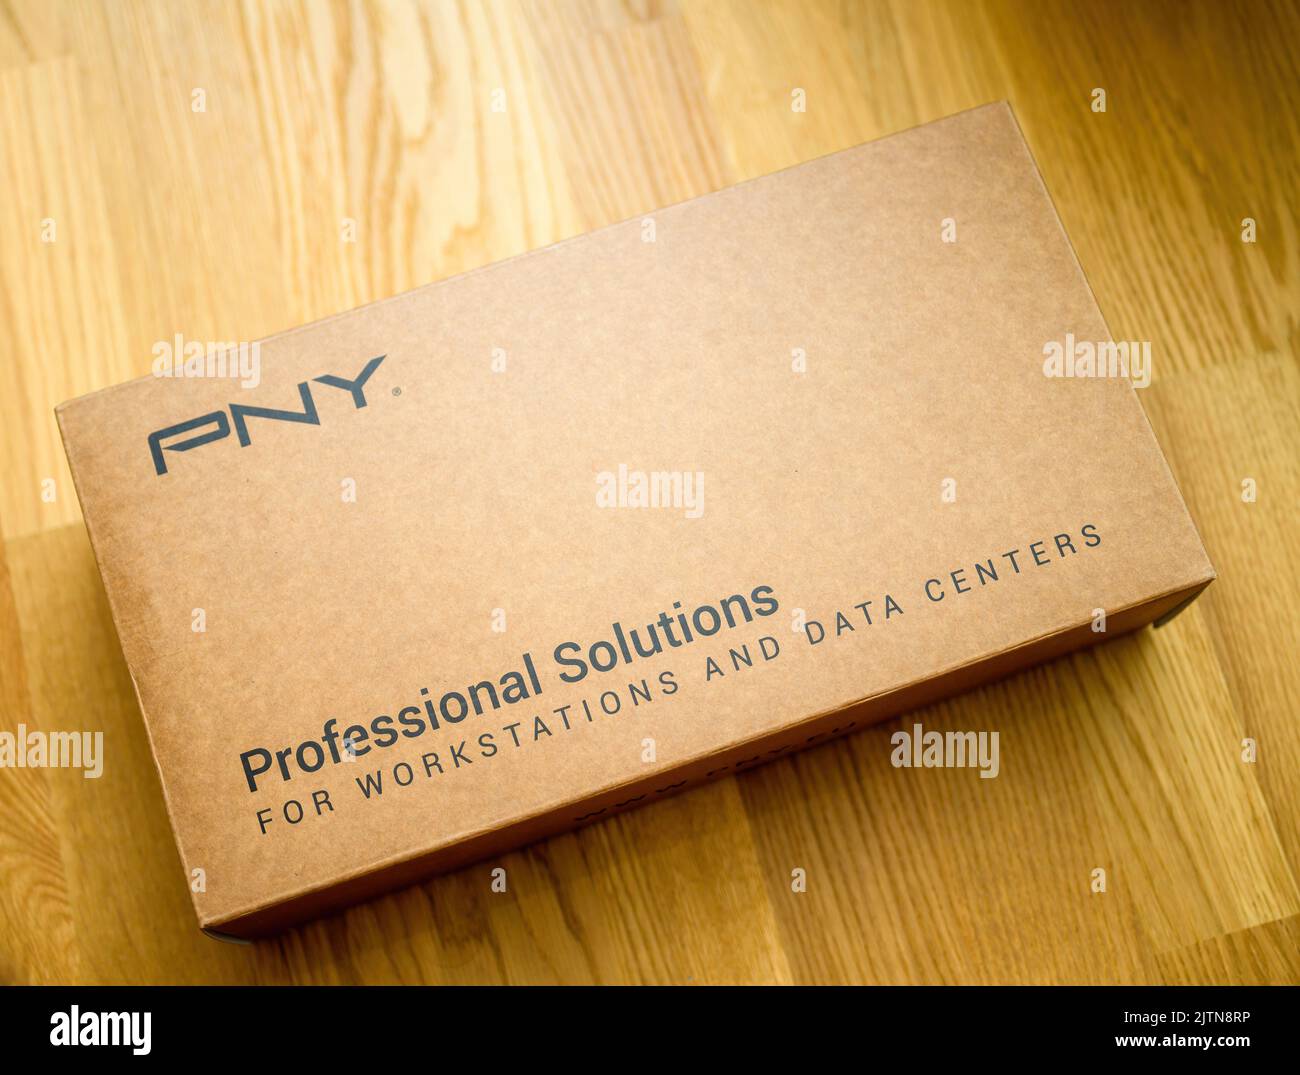 London, United Kingdom - Aug 5, 2022: Cardboard box of new PNY PRofessional Solutions workstation video card GPU for CAD CGI scientific machine learning Stock Photo